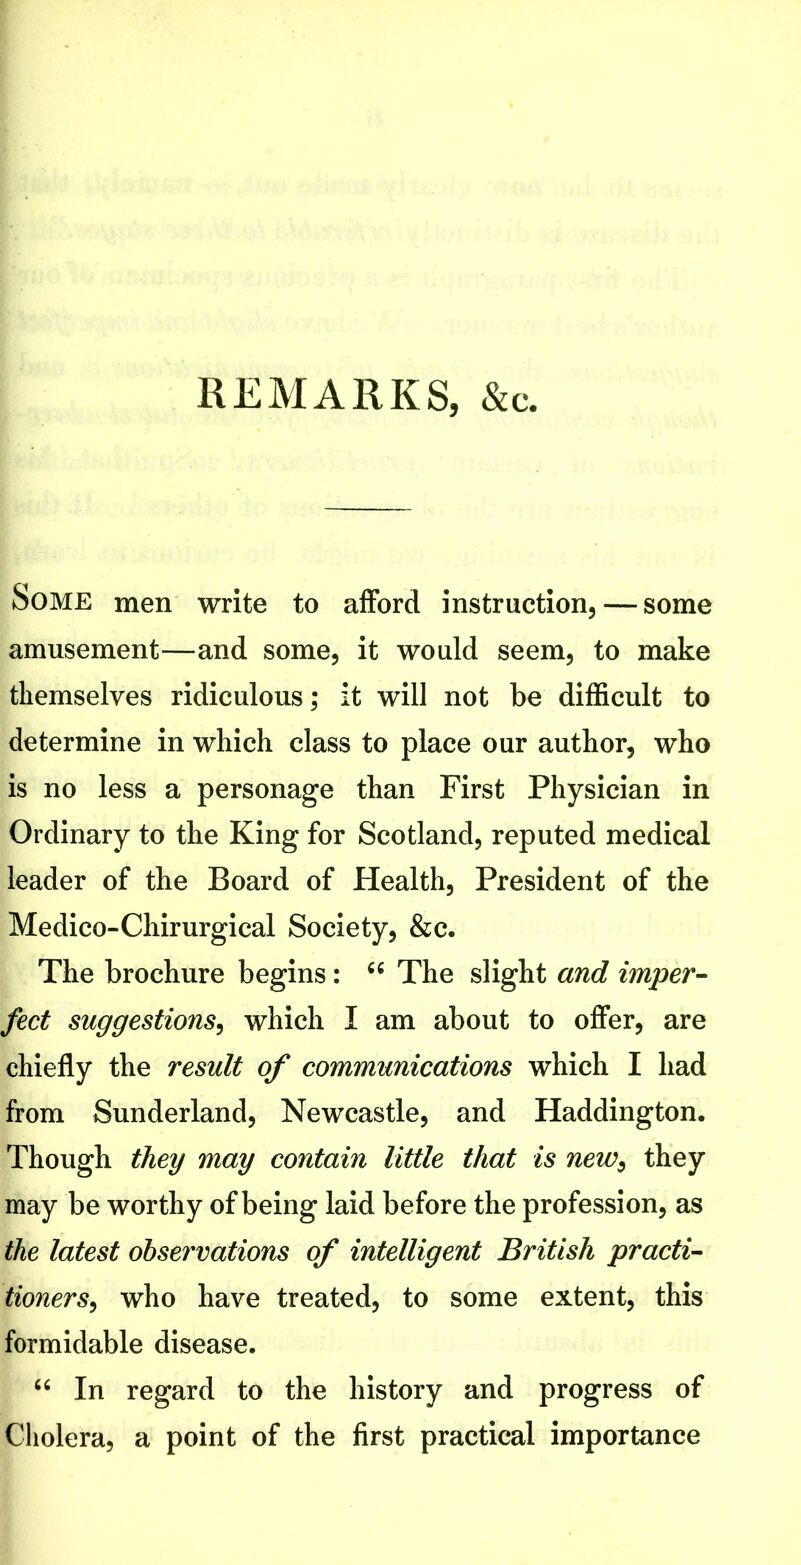 REMARKS, &c. Some men write to afford instruction, — some amusement—and some, it would seem, to make themselves ridiculous; it will not be difficult to determine in which class to place our author, who is no less a personage than First Physician in Ordinary to the King for Scotland, reputed medical leader of the Board of Health, President of the Medico-Chirurgical Society, &c. The brochure begins: 66 The slight and imper- fect suggestions, which I am about to offer, are chiefly the result of communications which I had from Sunderland, Newcastle, and Haddington. Though they may contain little that is new, they may be worthy of being laid before the profession, as the latest observations of intelligent British practi- tioners, who have treated, to some extent, this formidable disease. “ In regard to the history and progress of Cholera, a point of the first practical importance